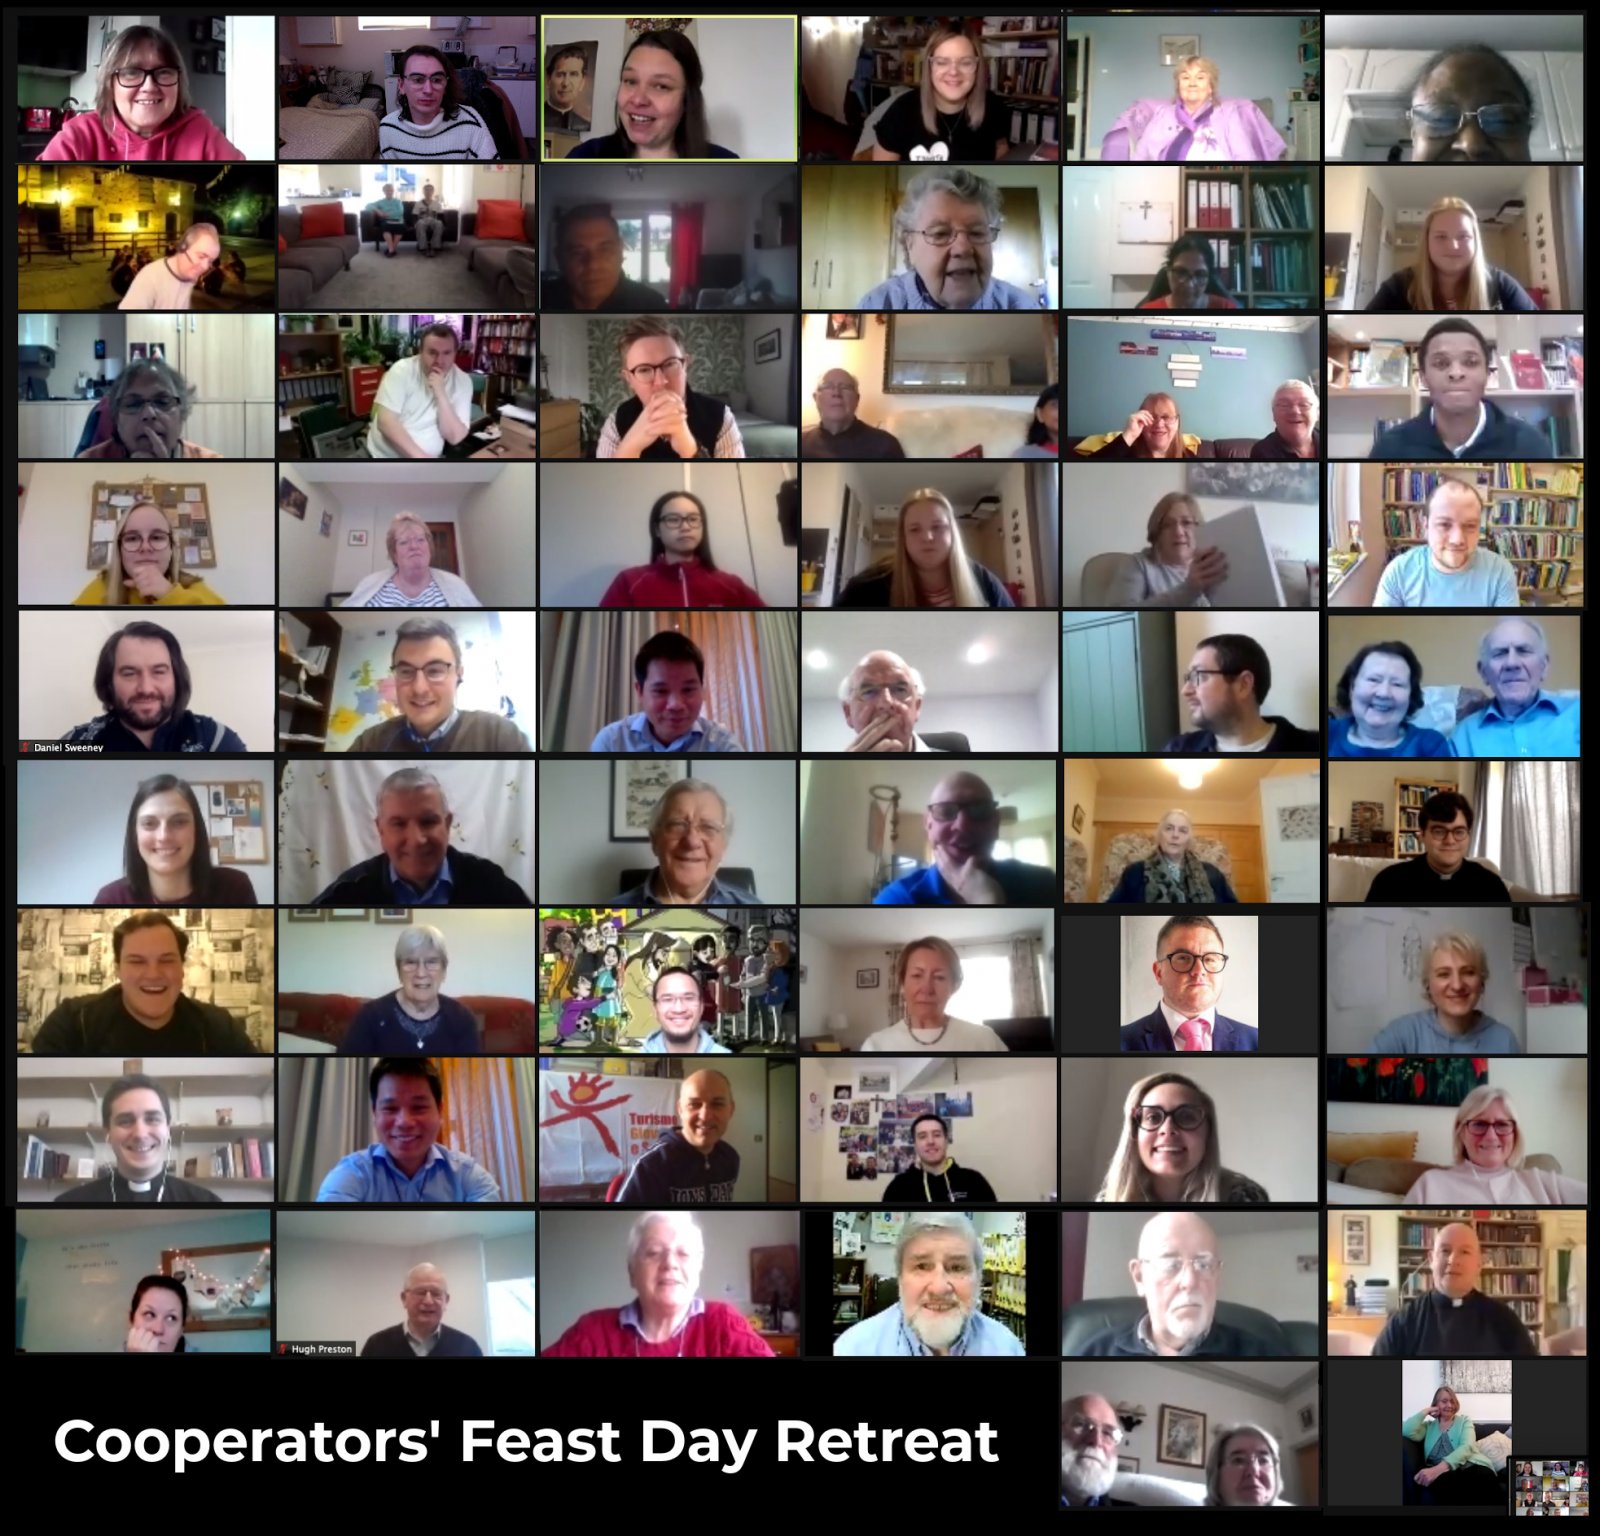 Salesian Family across Europe joined GBR Cooperators online for Feast